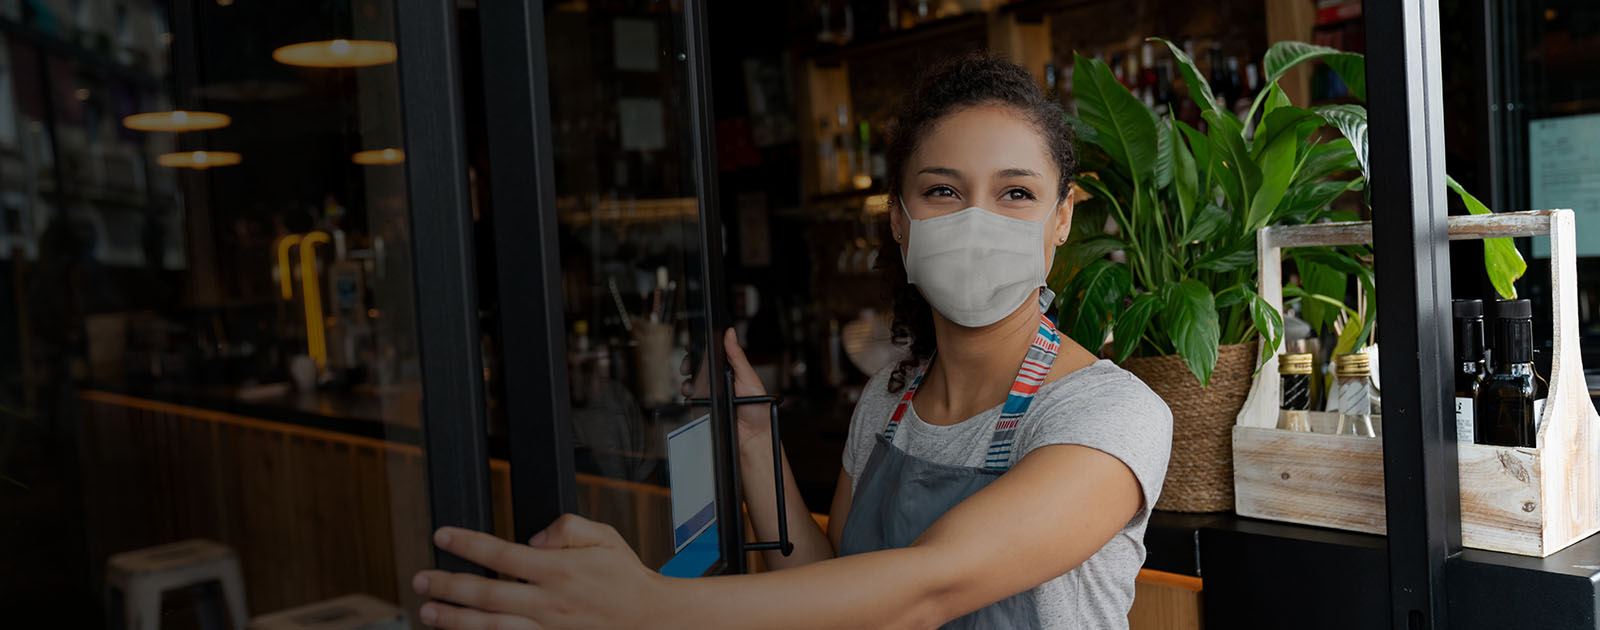 Small and medium business owners stay resilient through the pandemic